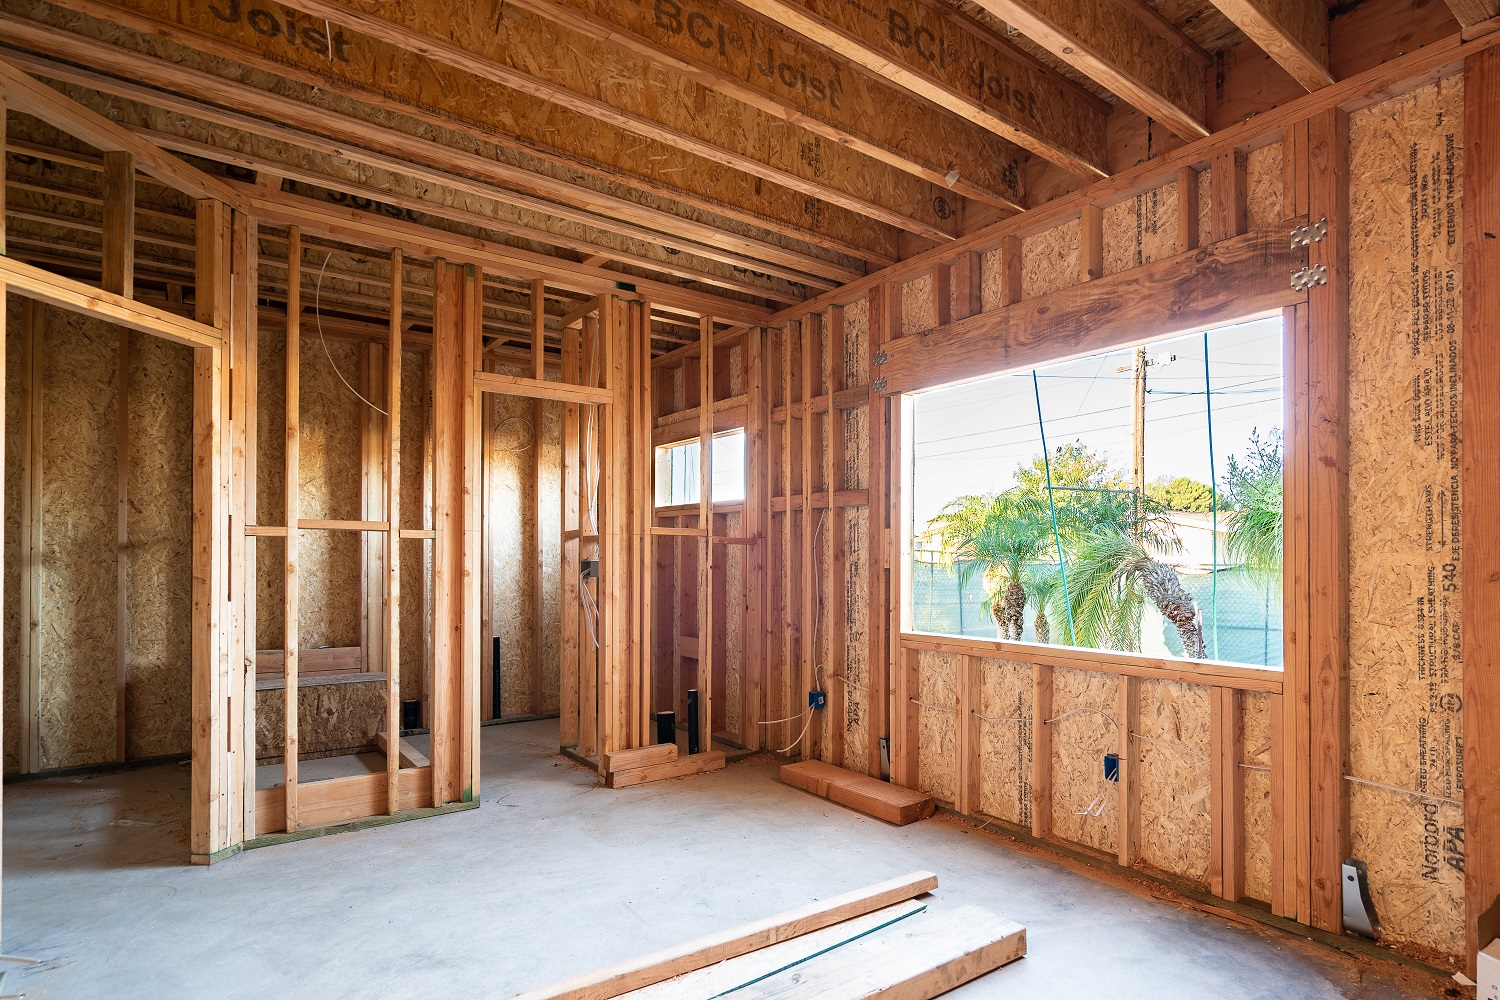 Room addition contractor serving San Diego